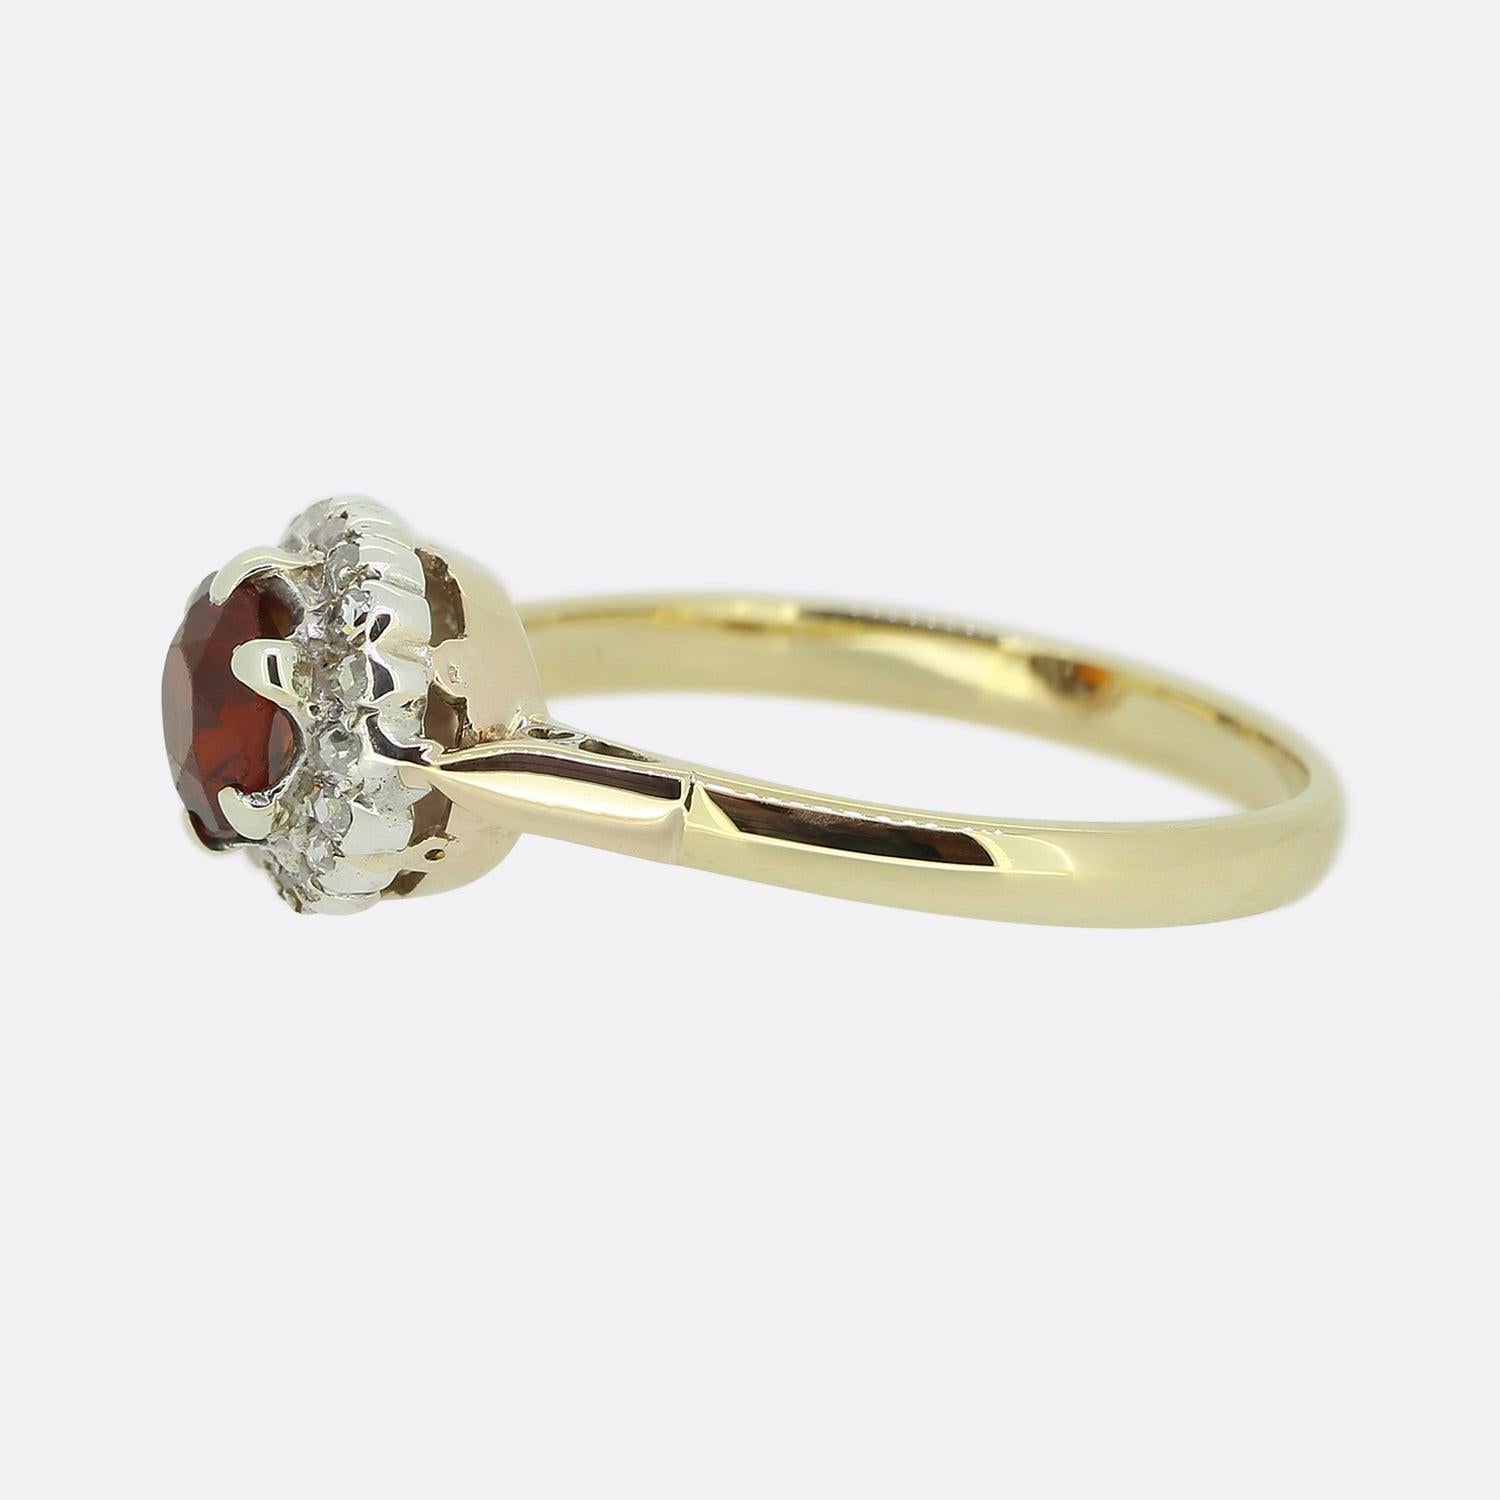 Here we have a lovely vintage garnet and diamond cluster ring. A six clawed platinum setting plays host to a round faceted garnet possessing a rich orange colour tone. This principle stone is then surrounded by a single row of rose cut diamonds